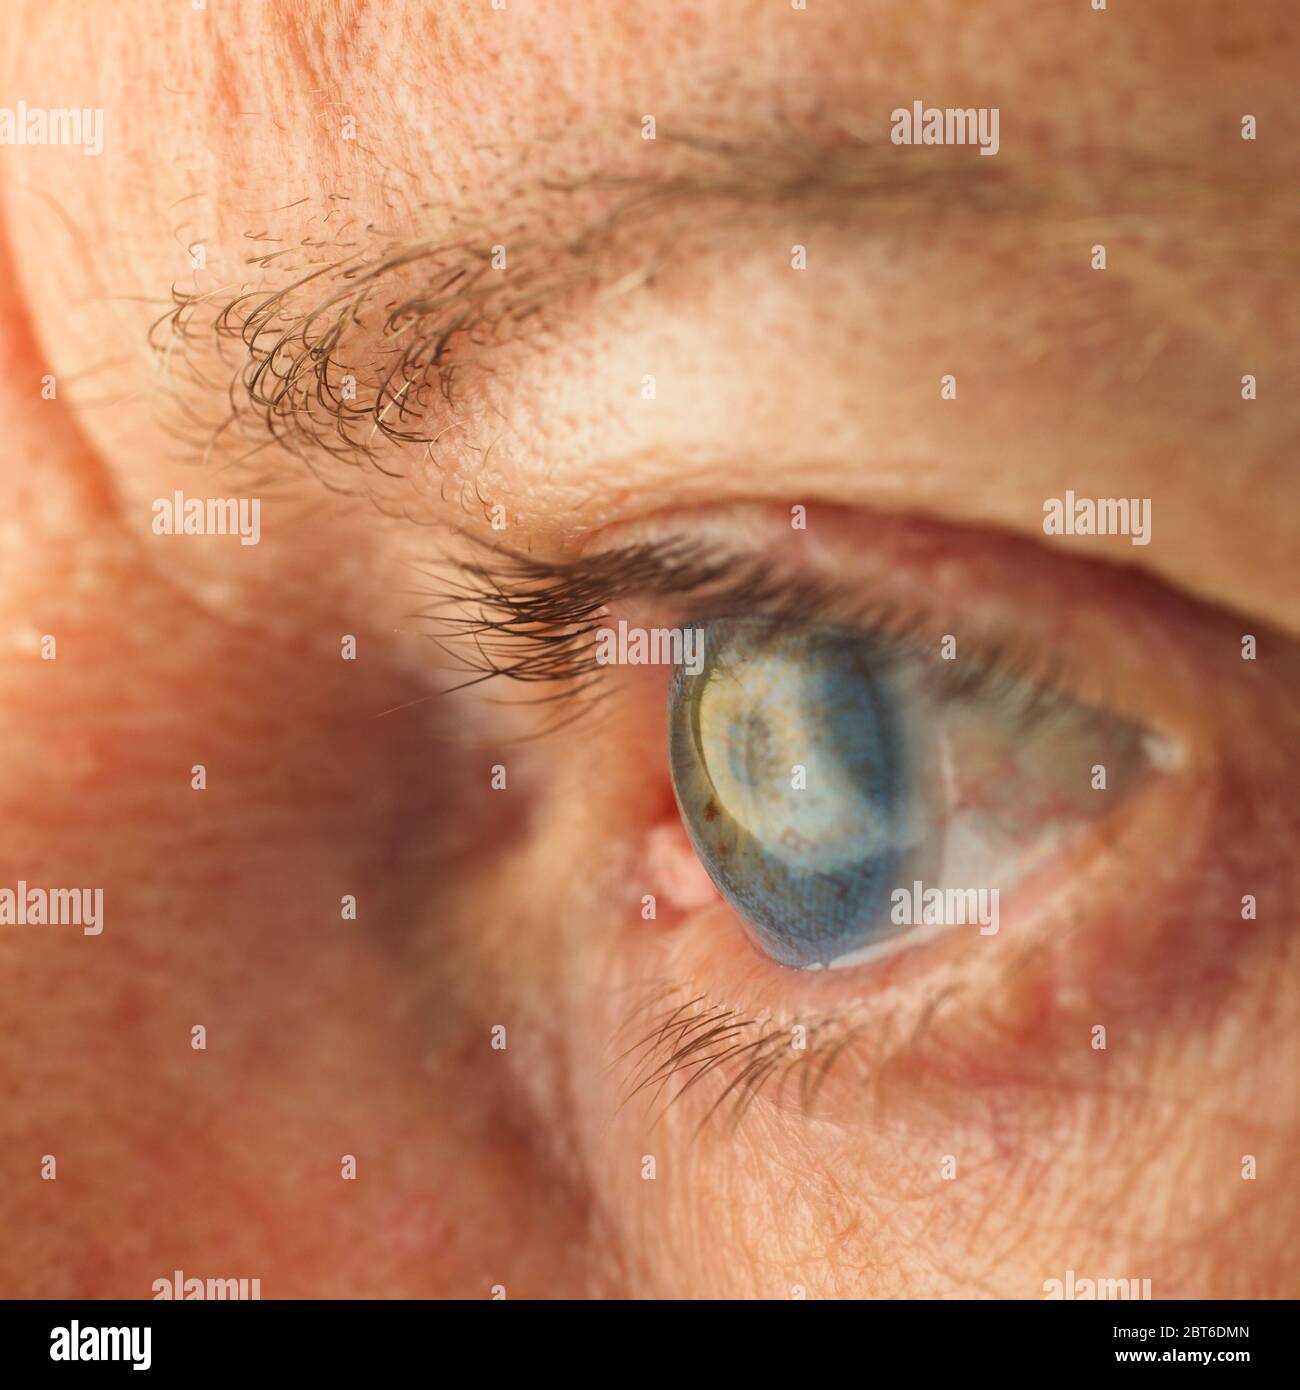 Closeup of womans eye wearing tinted contact lens, side view Stock Photo